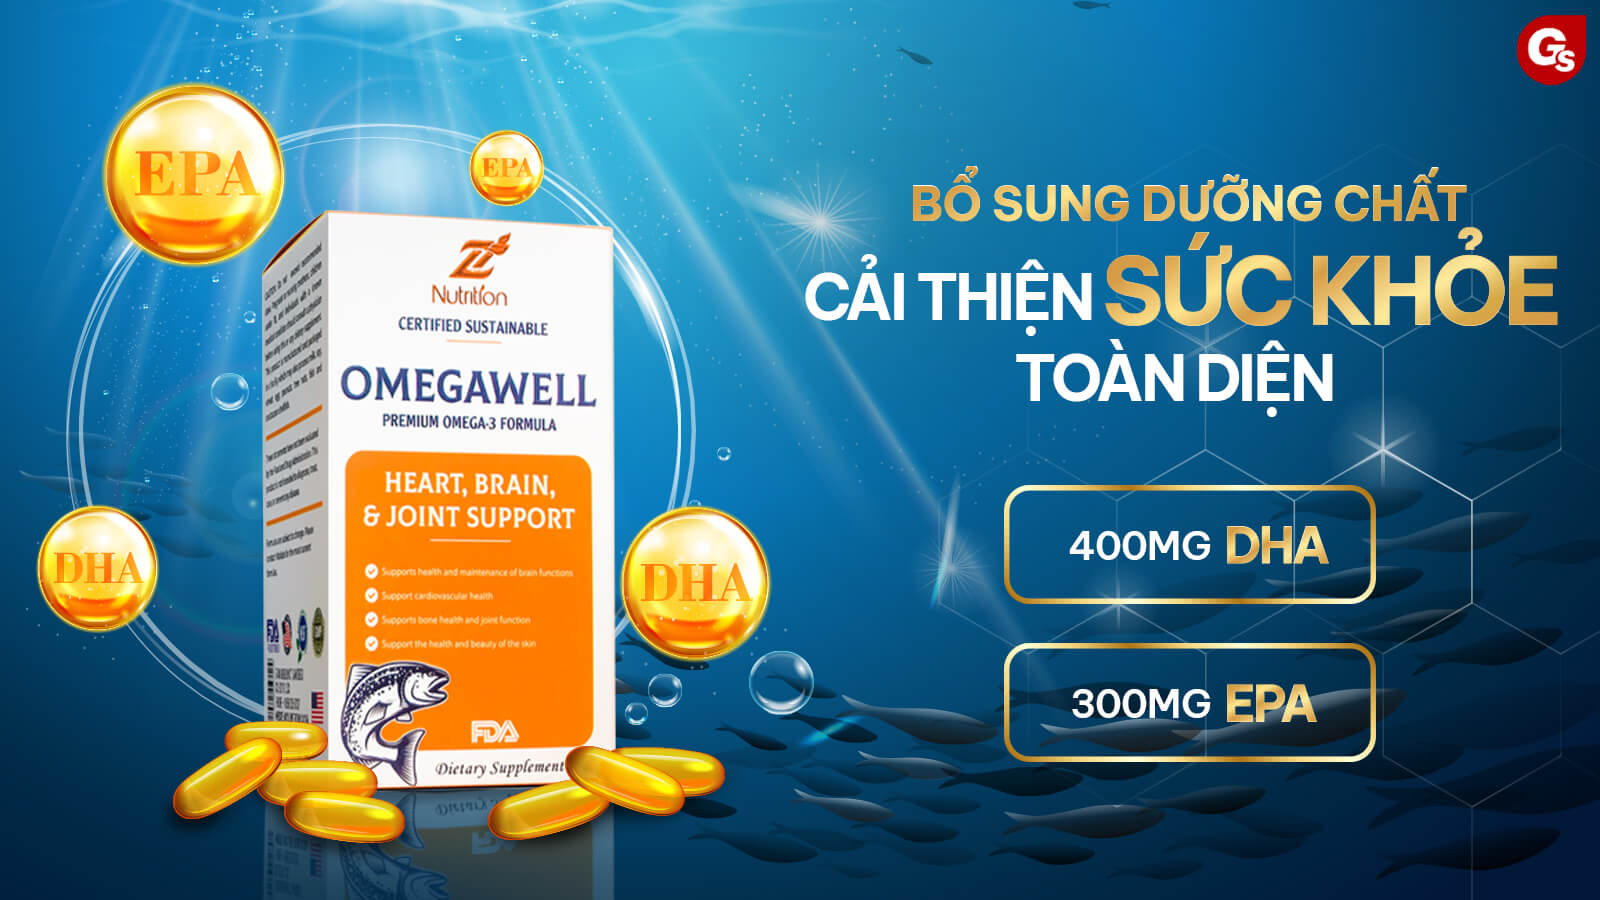 Nutrition-Omegawell-bo-sung-ham-luong-dau-ca-chat-luong-cao